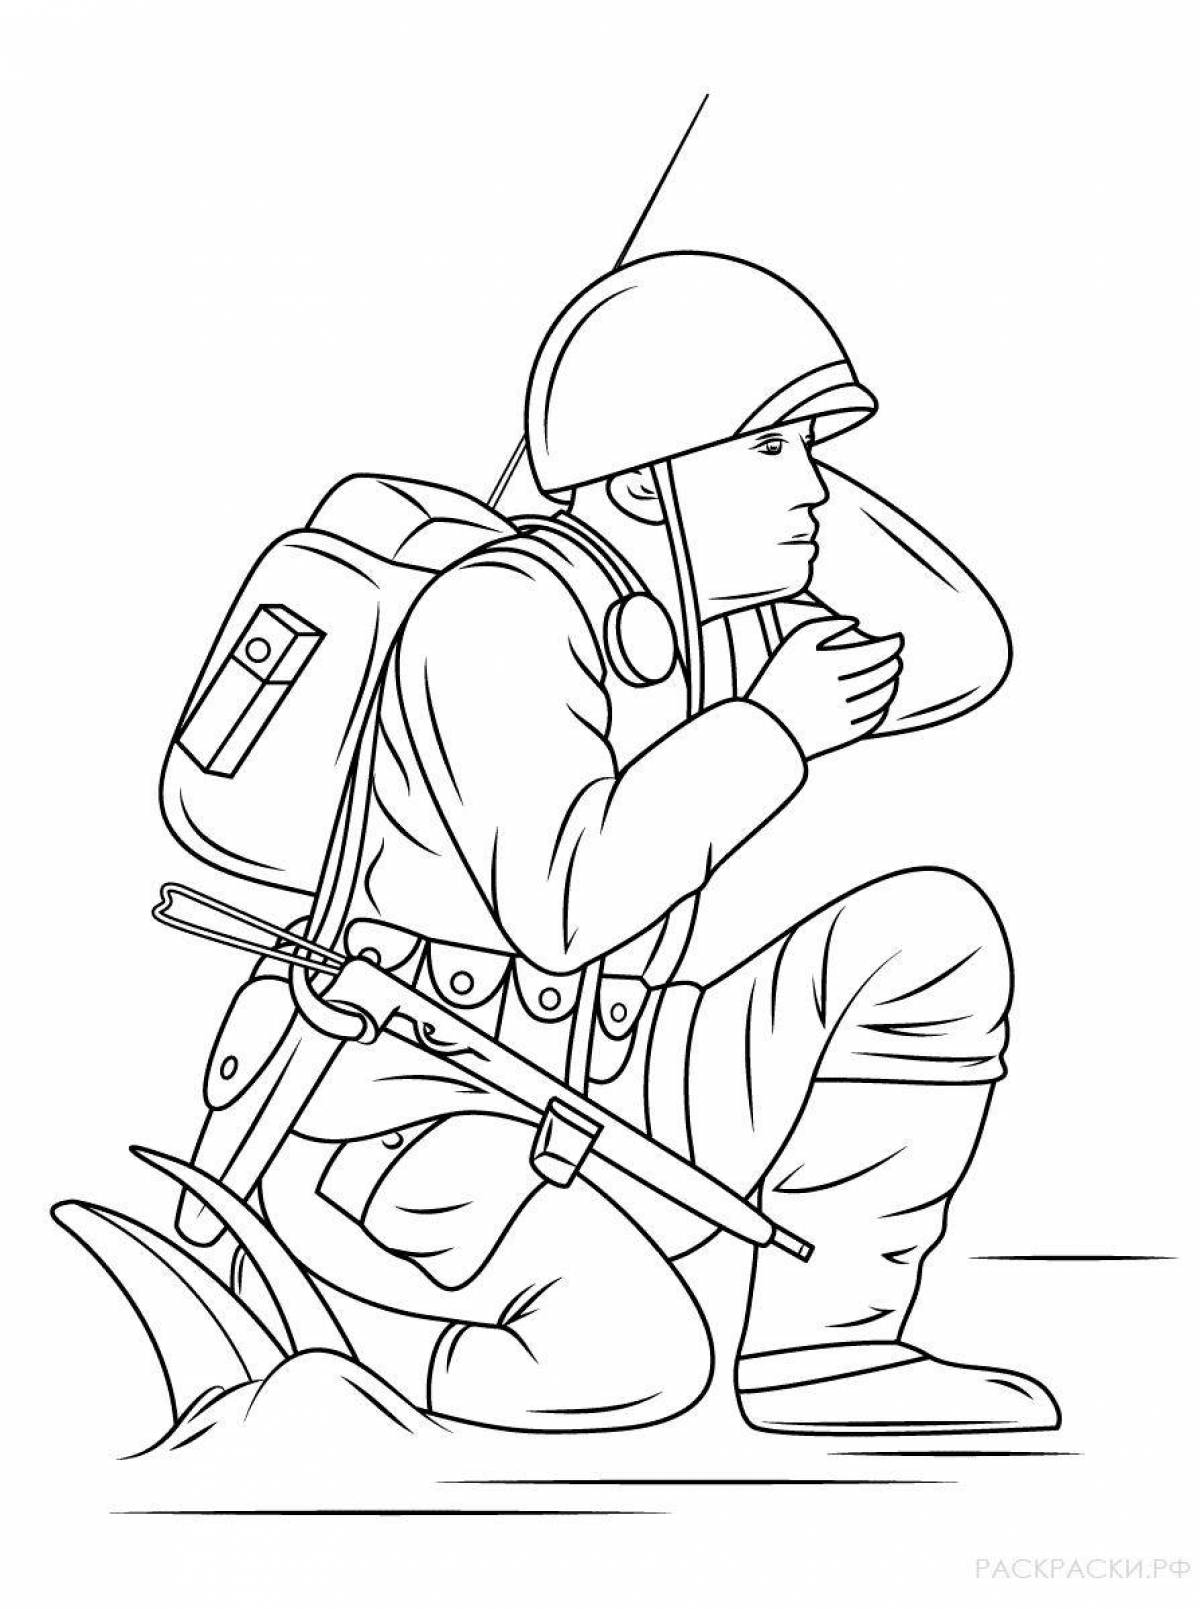 Heroic soldier coloring for kids